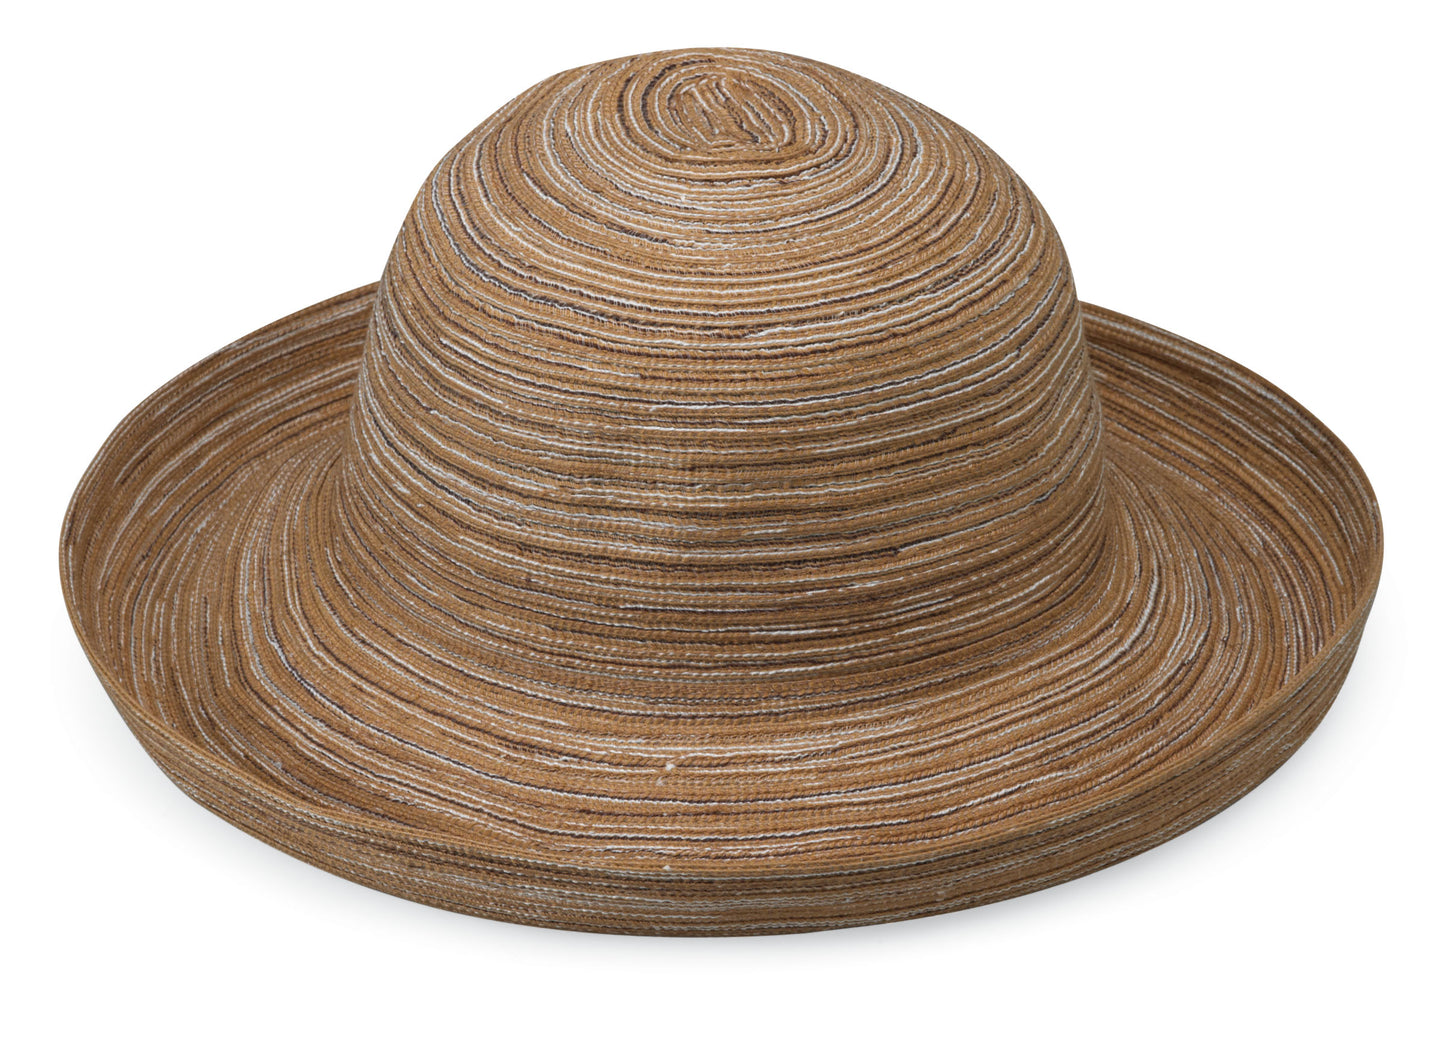 This packable brown beach hat not only offers UPF 50+ sun protection but is also recommended by the Skin Cancer Foundation. Its wide brim ensures stylish sun coverage, making it a travel-friendly and fashionable addition to your personal fashion collection.